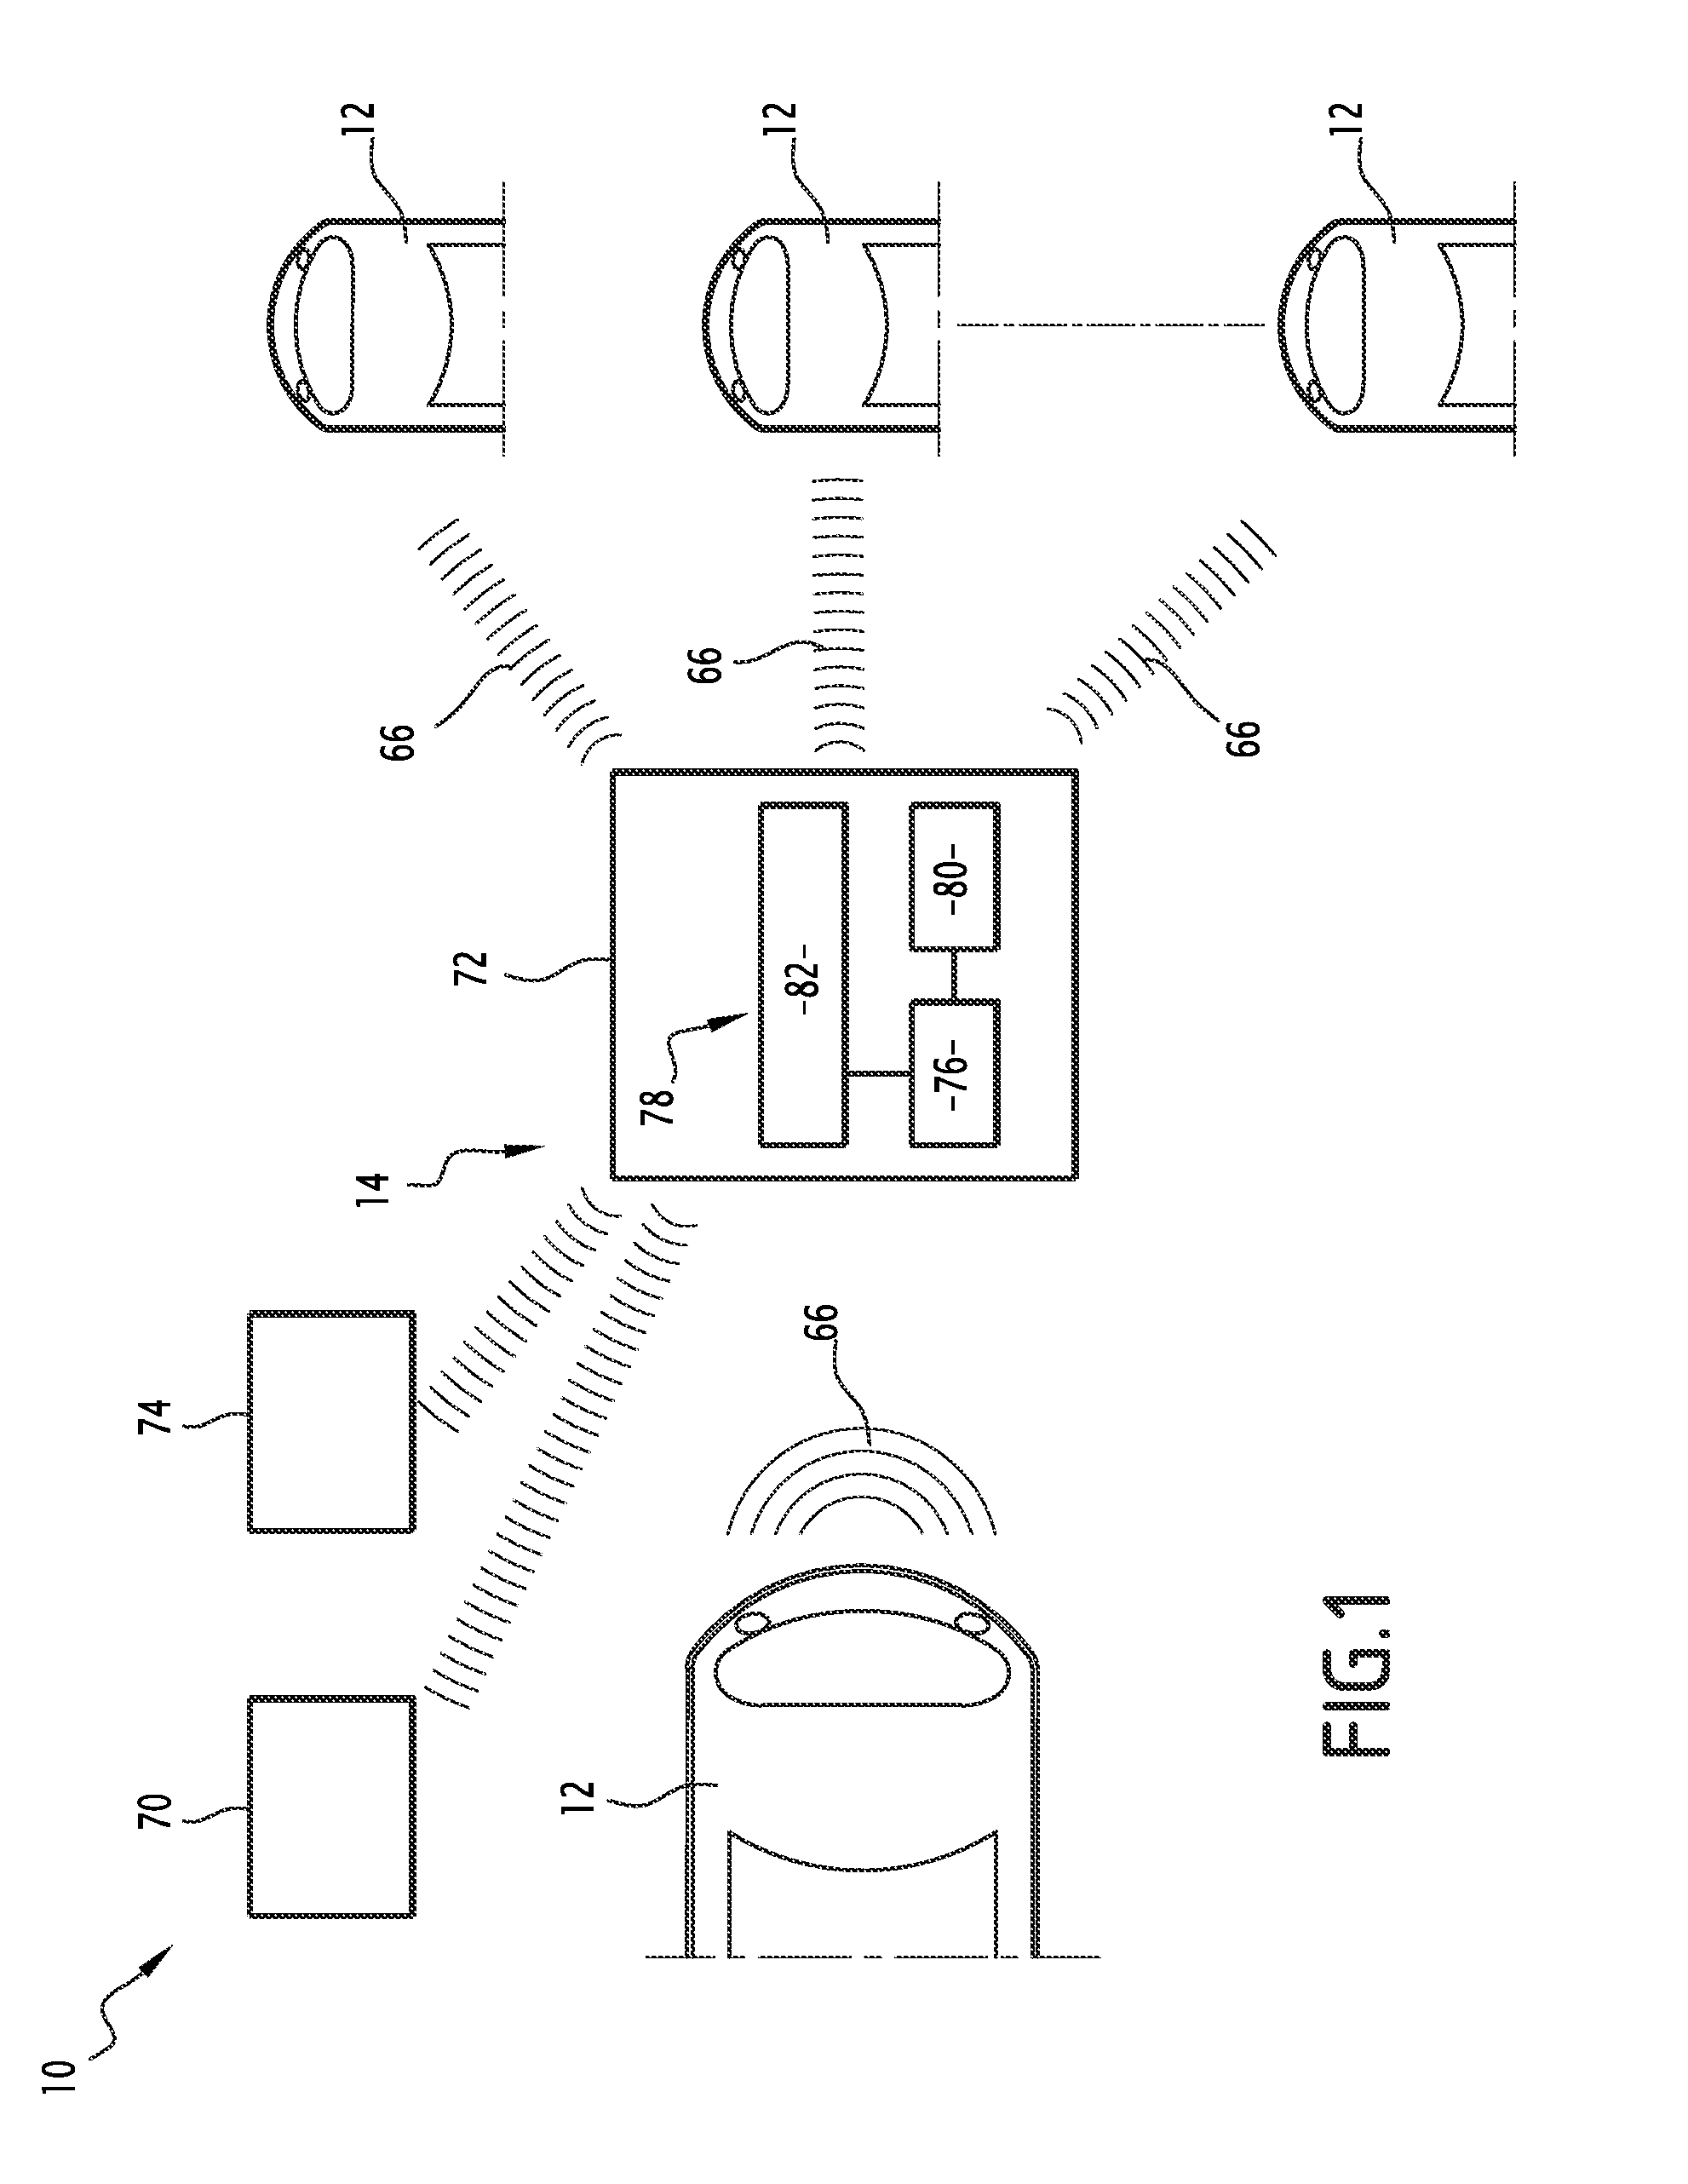 Guided ground vehicle including a device for managing a derailment of the vehicle, and associated derailment management method